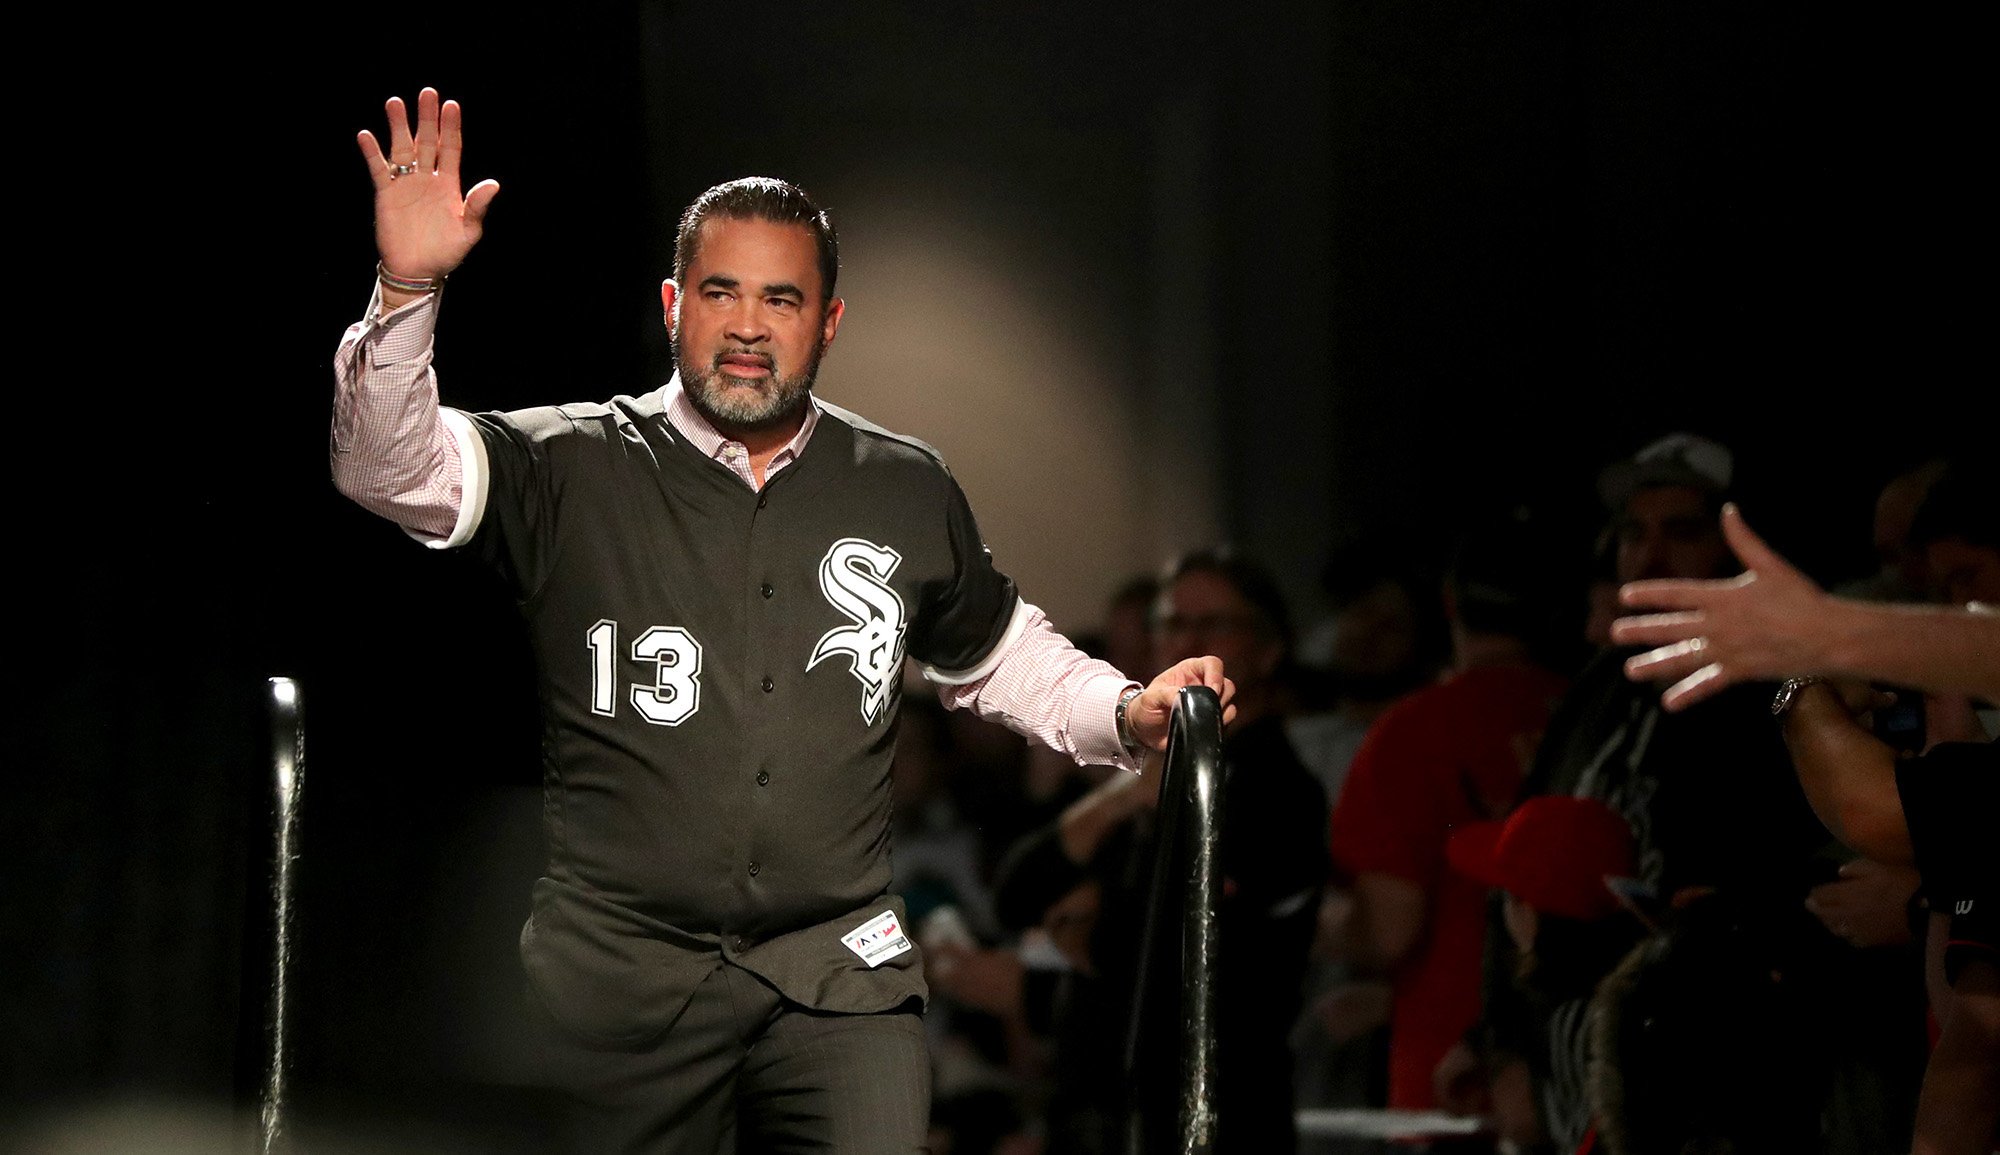 Phil Rosenthal: Ozzie Guillen reunites with his White Sox family: 